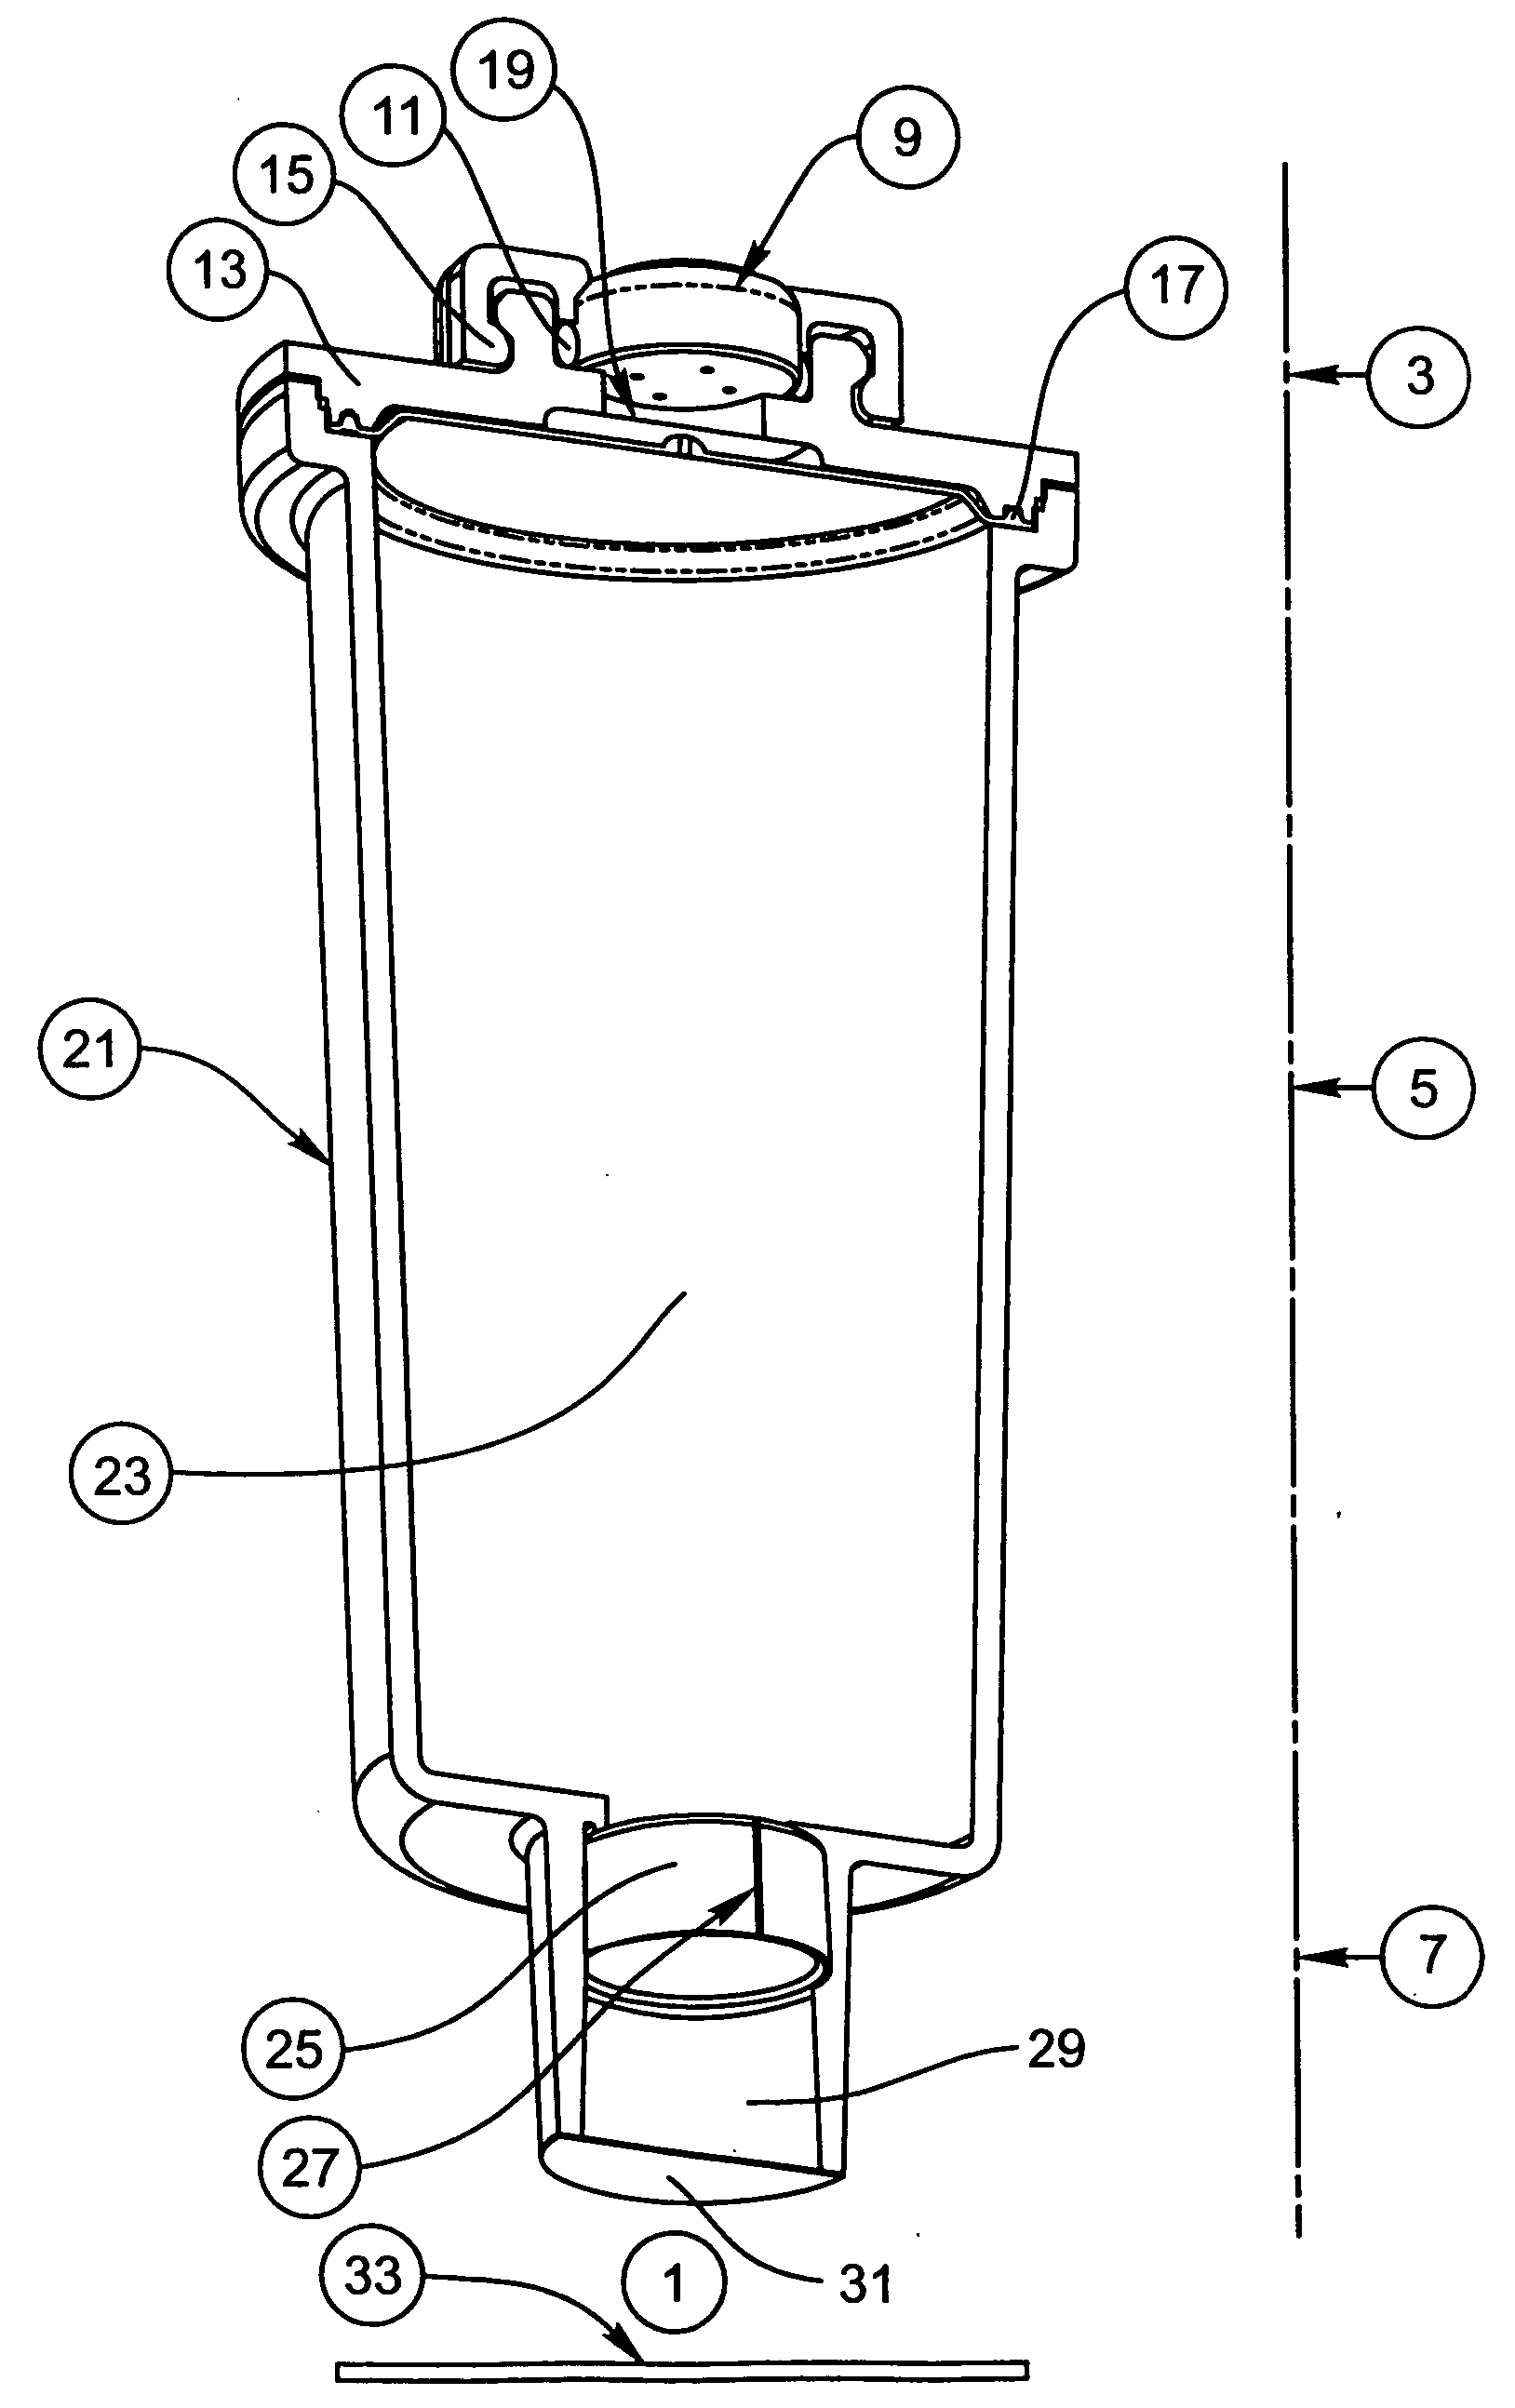 Device employing gas generating cell for facilitating controlled release of fluid into ambient environment